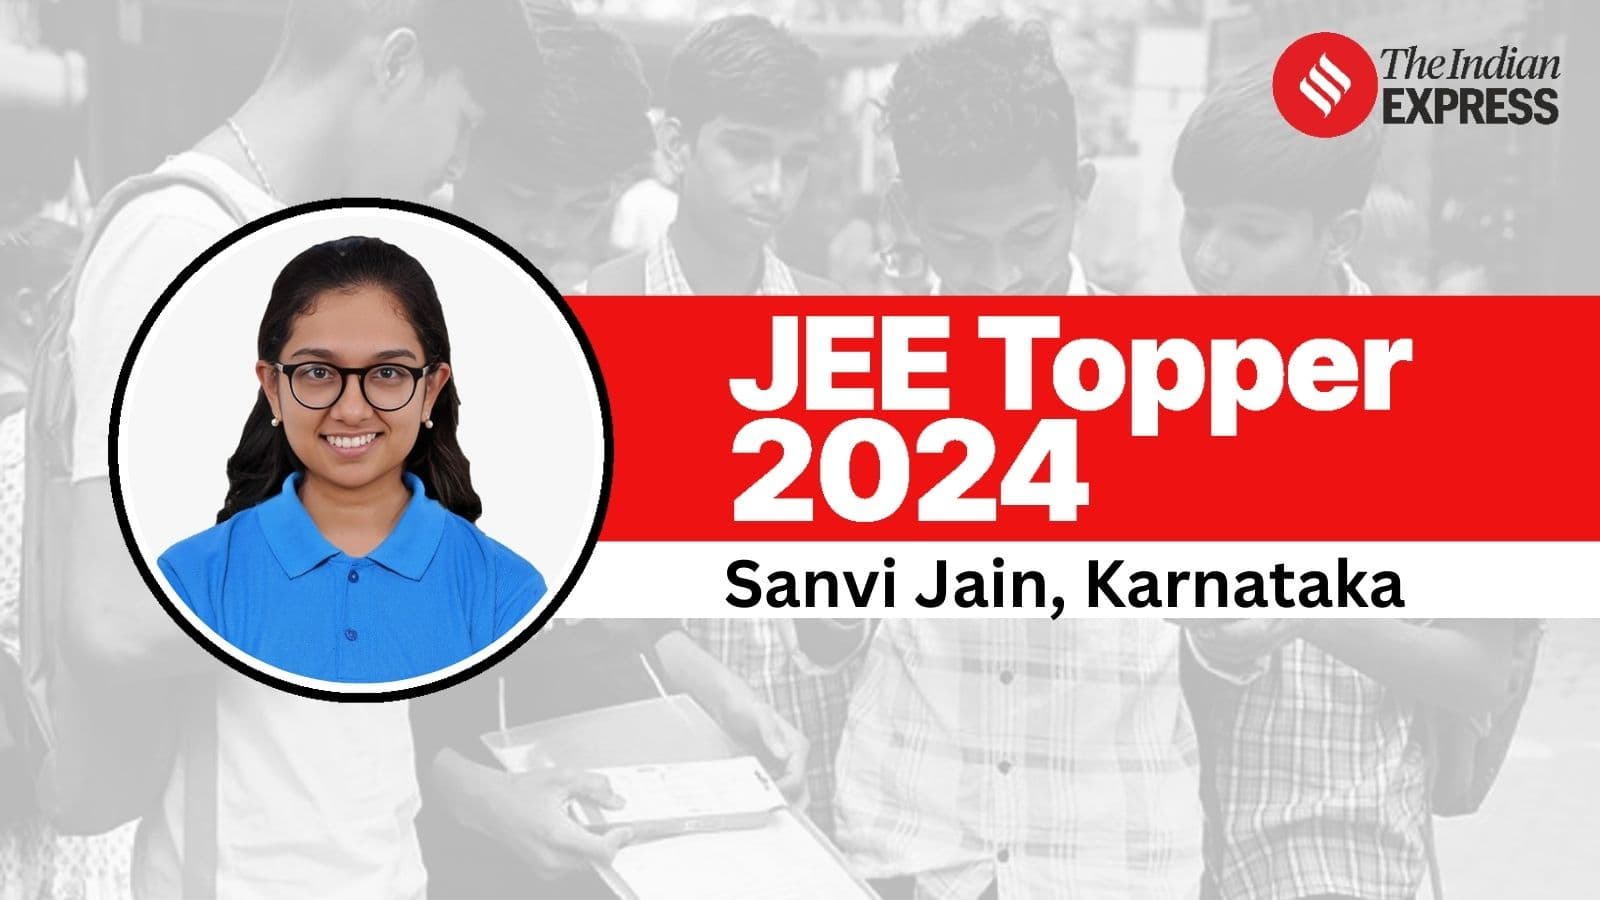 JEE Main 2024: This time, just two of the 56 students in the JEE topper list 2024 are females -- Shayna Sinha from Delhi and Sanvi Jain from Karnataka.